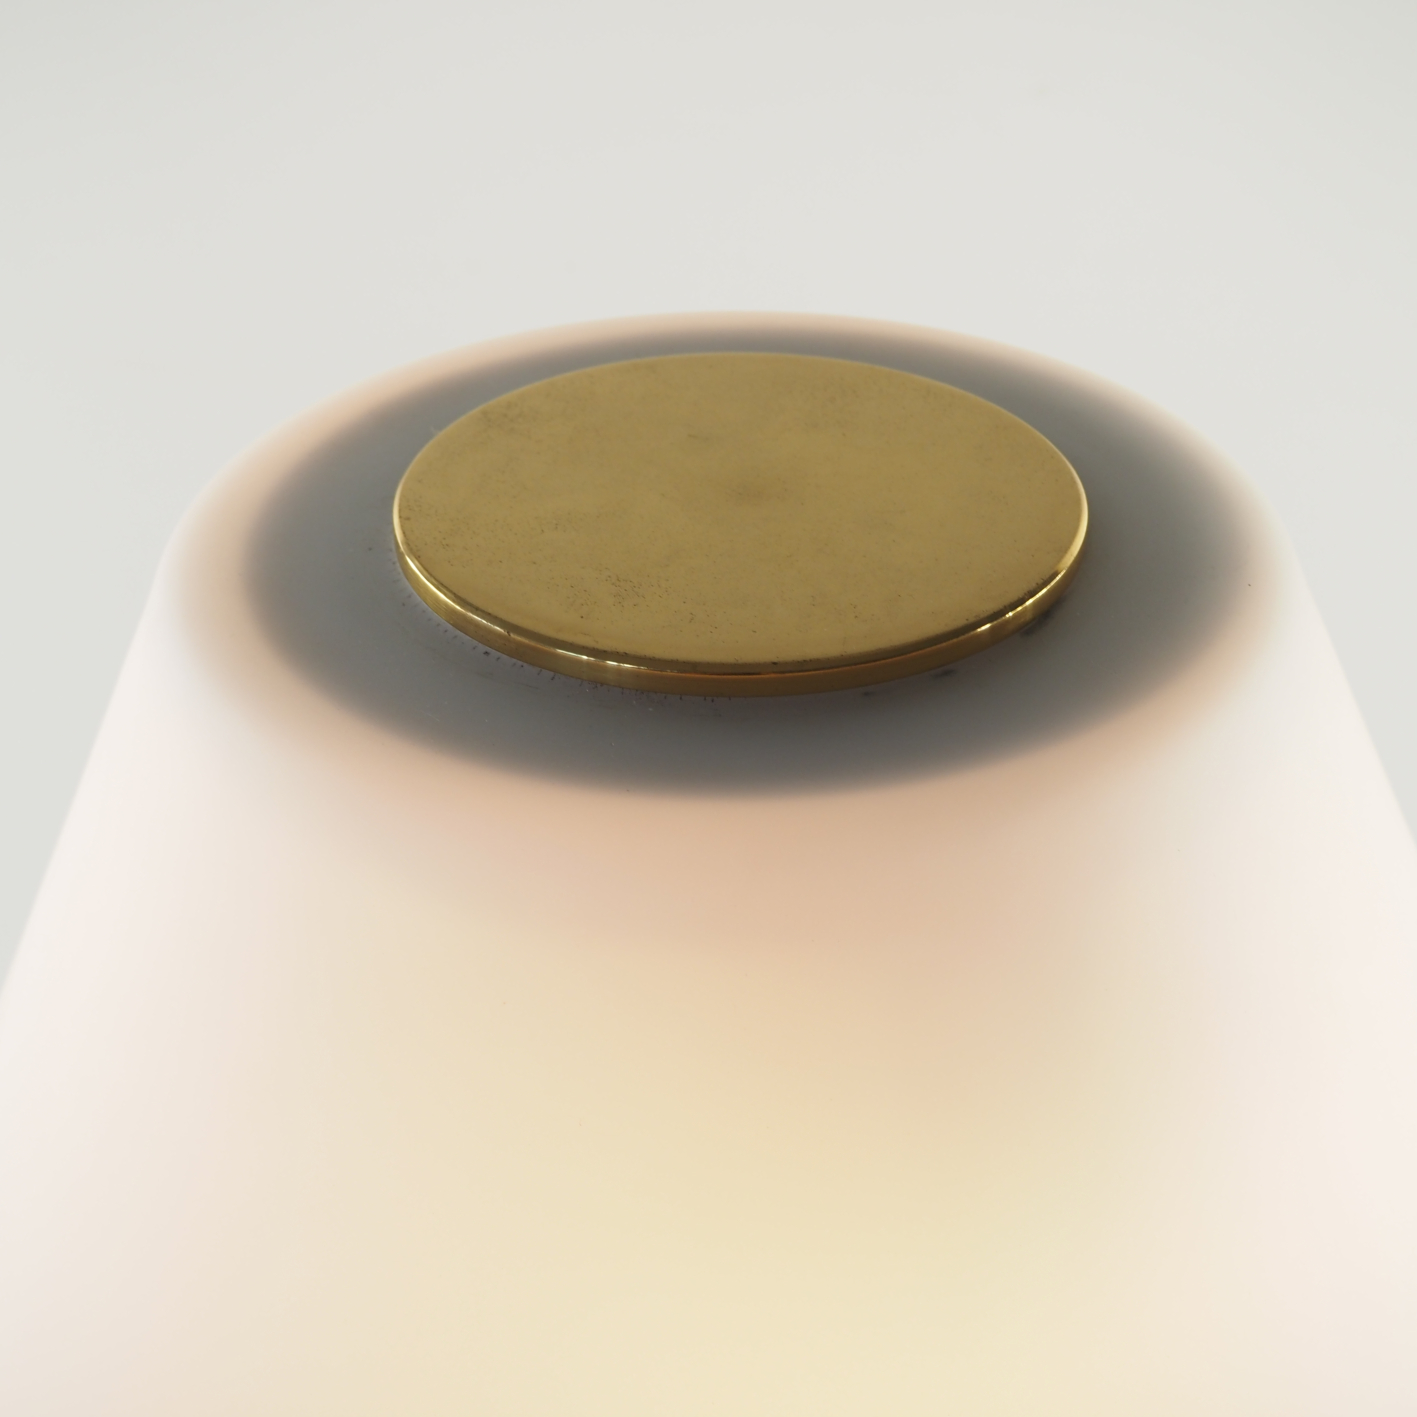 Table light by Selz (ca. 1990) - White